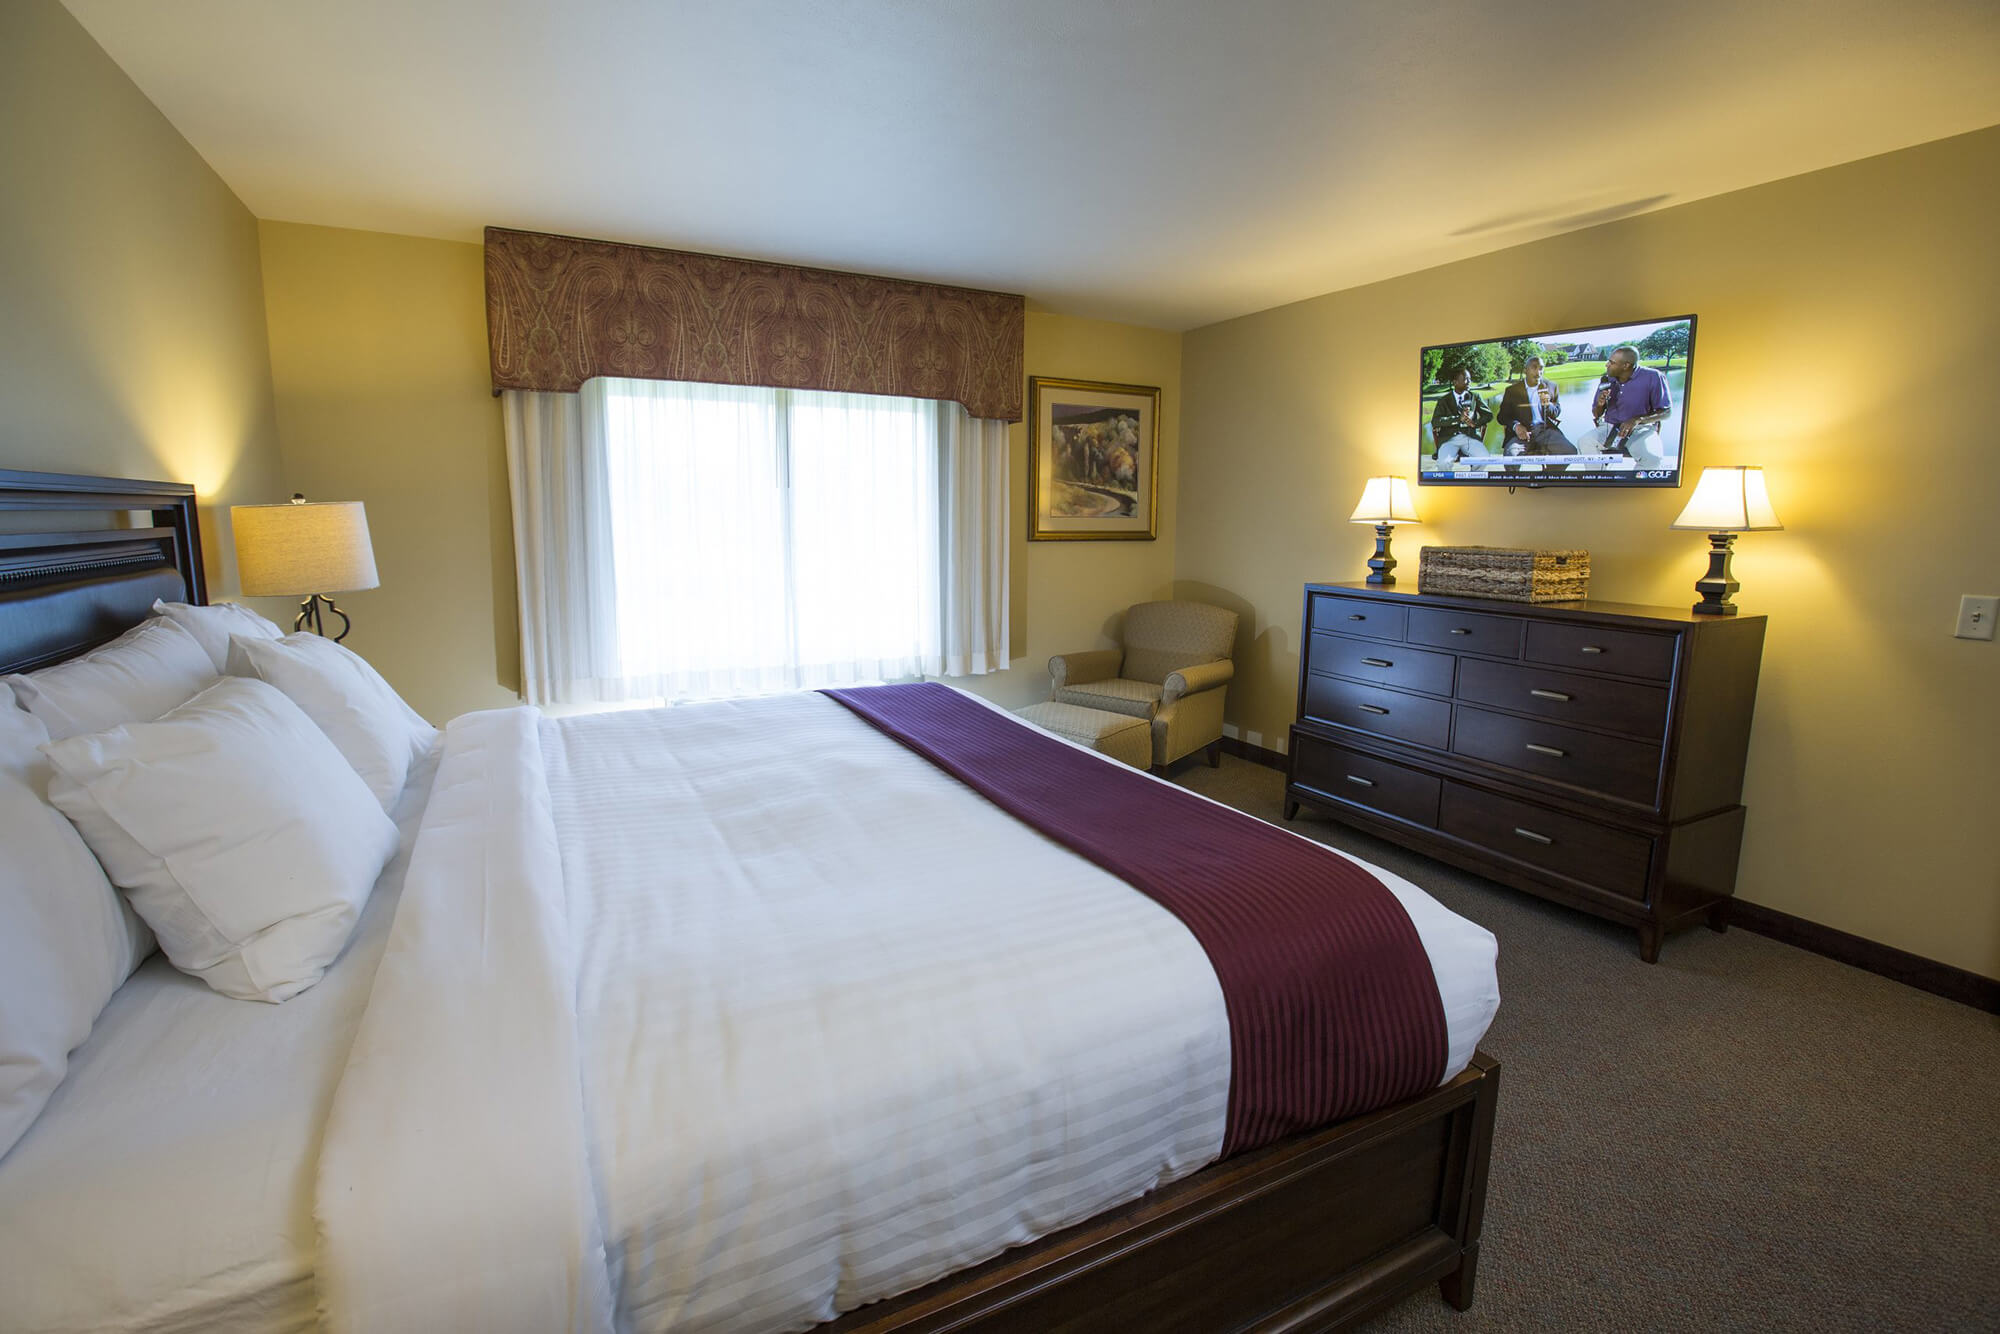 A Hotel Room in the Swan Lake Resort | Resorts | Marshall County Tourism